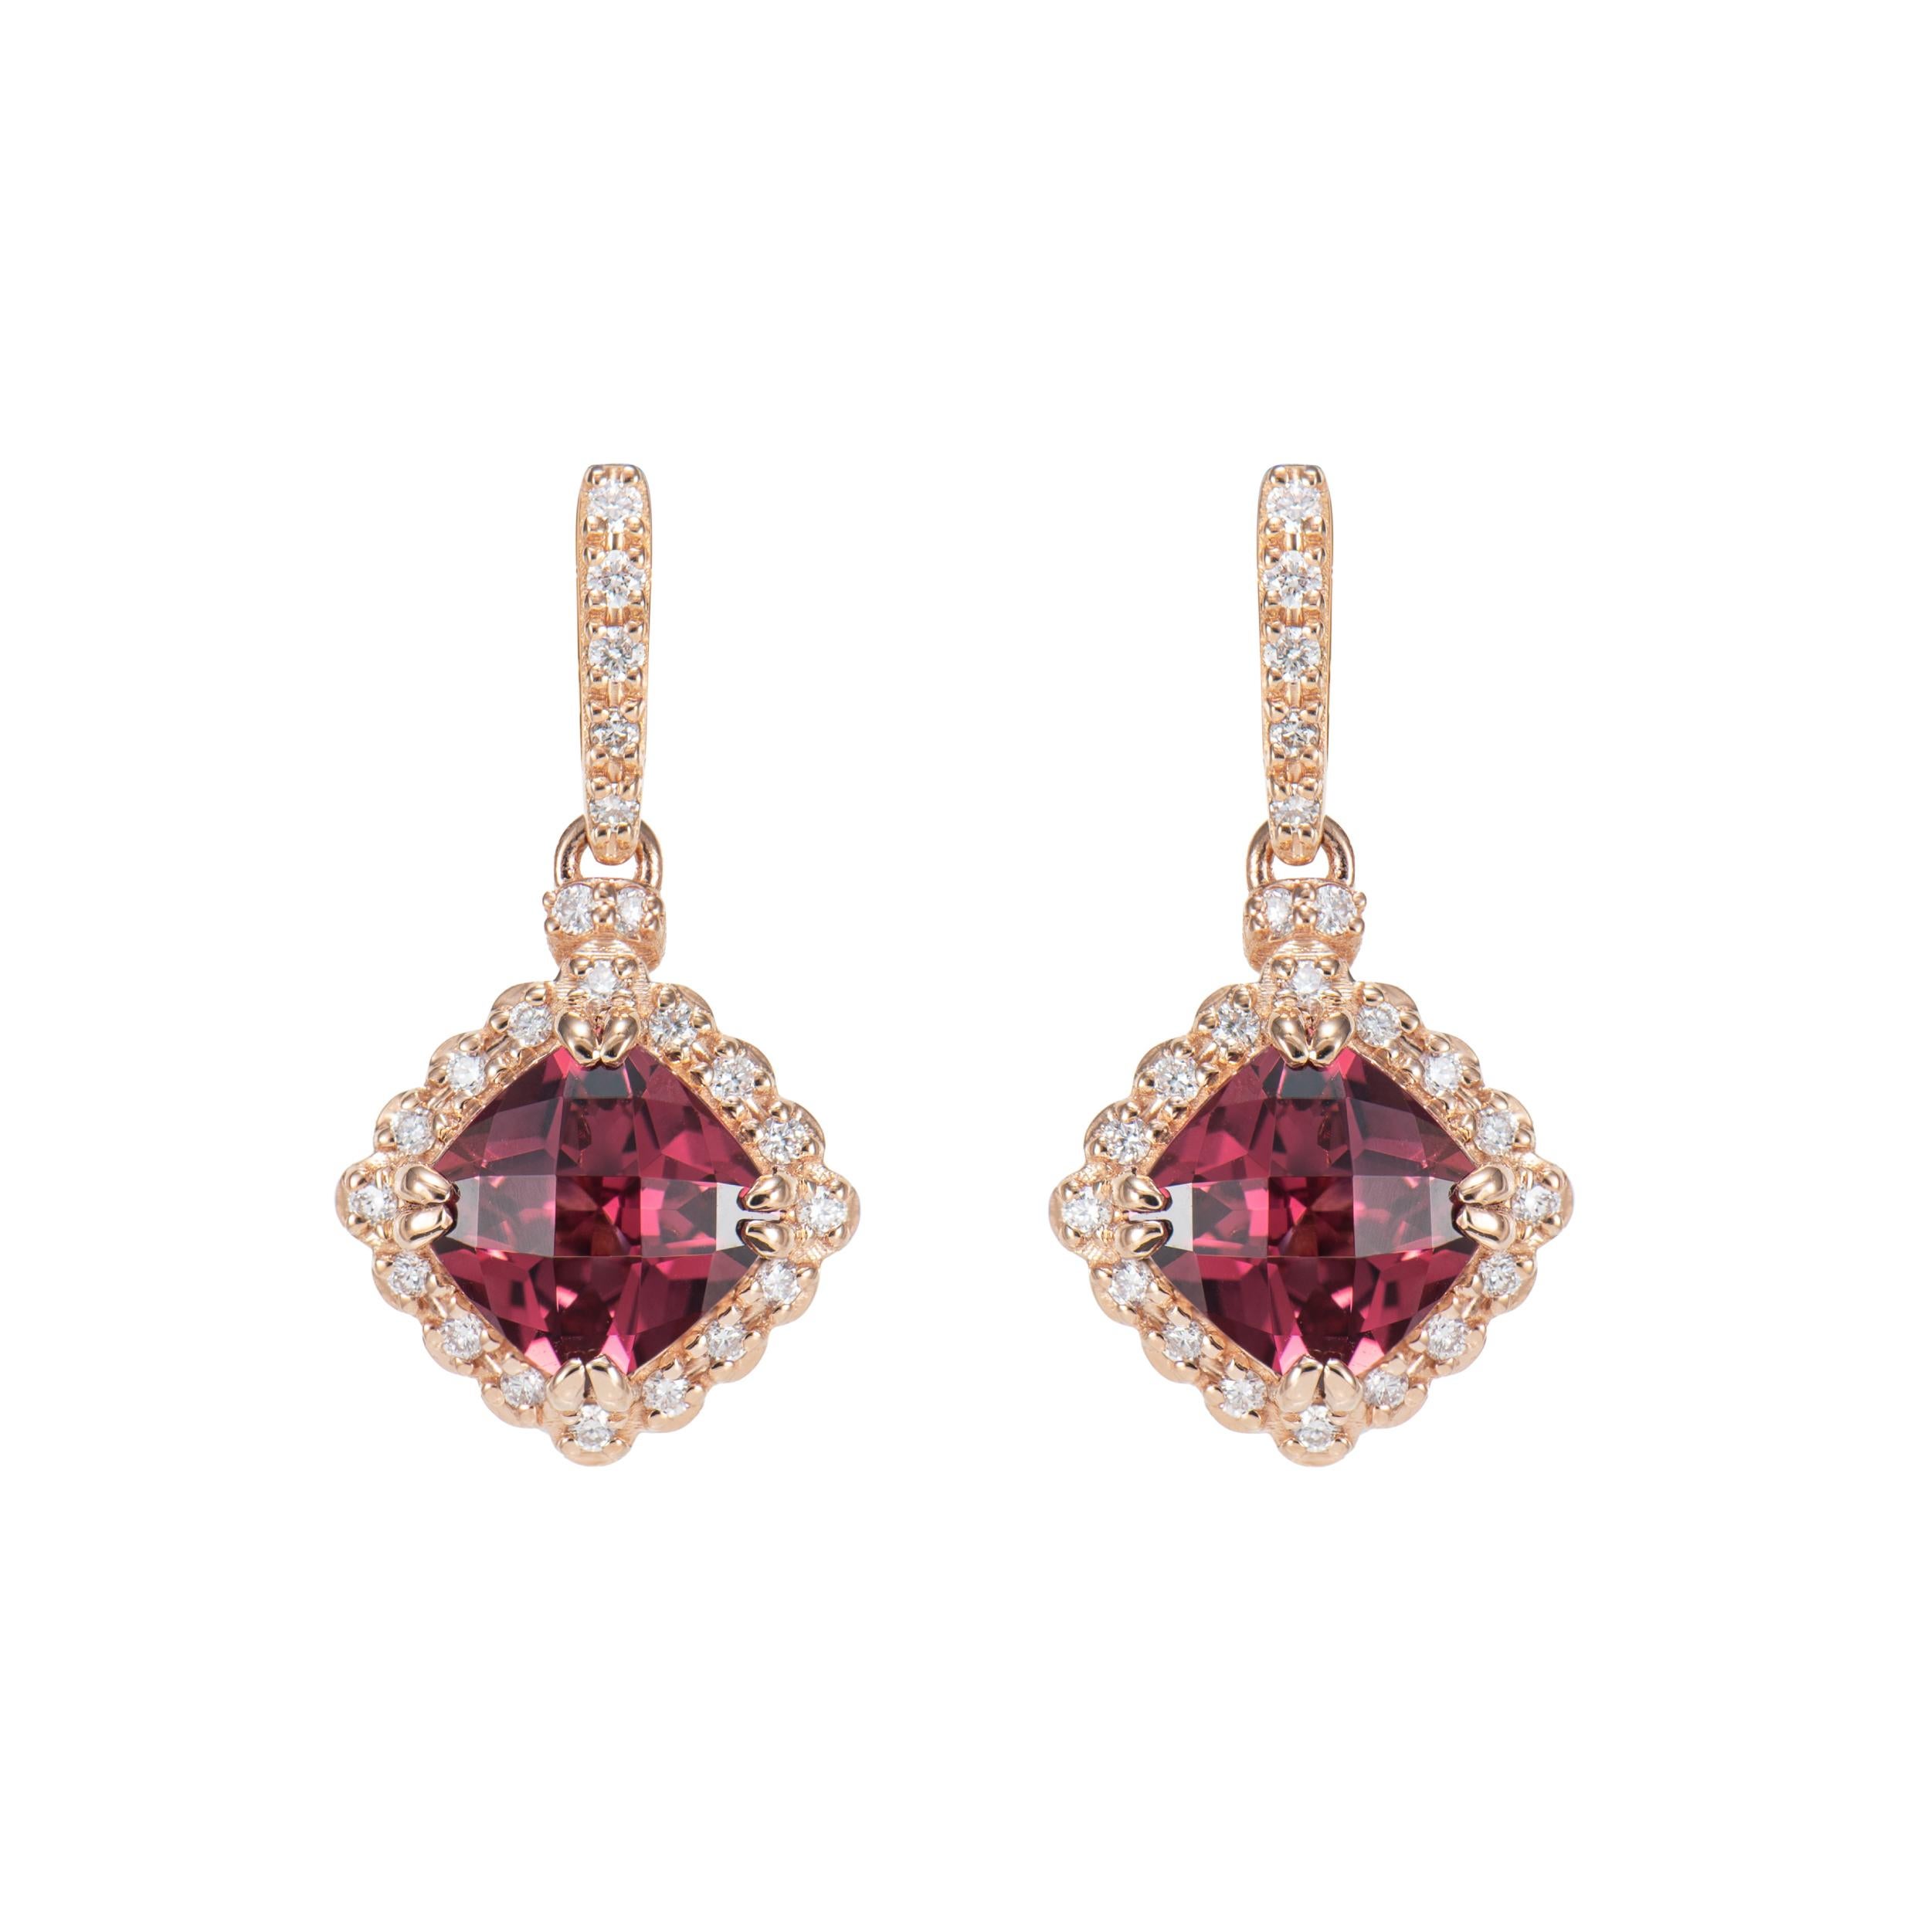 Contemporary 3.34 Carat Rhodolite Drop Earring in 18 Karat Rose Gold with Diamond For Sale